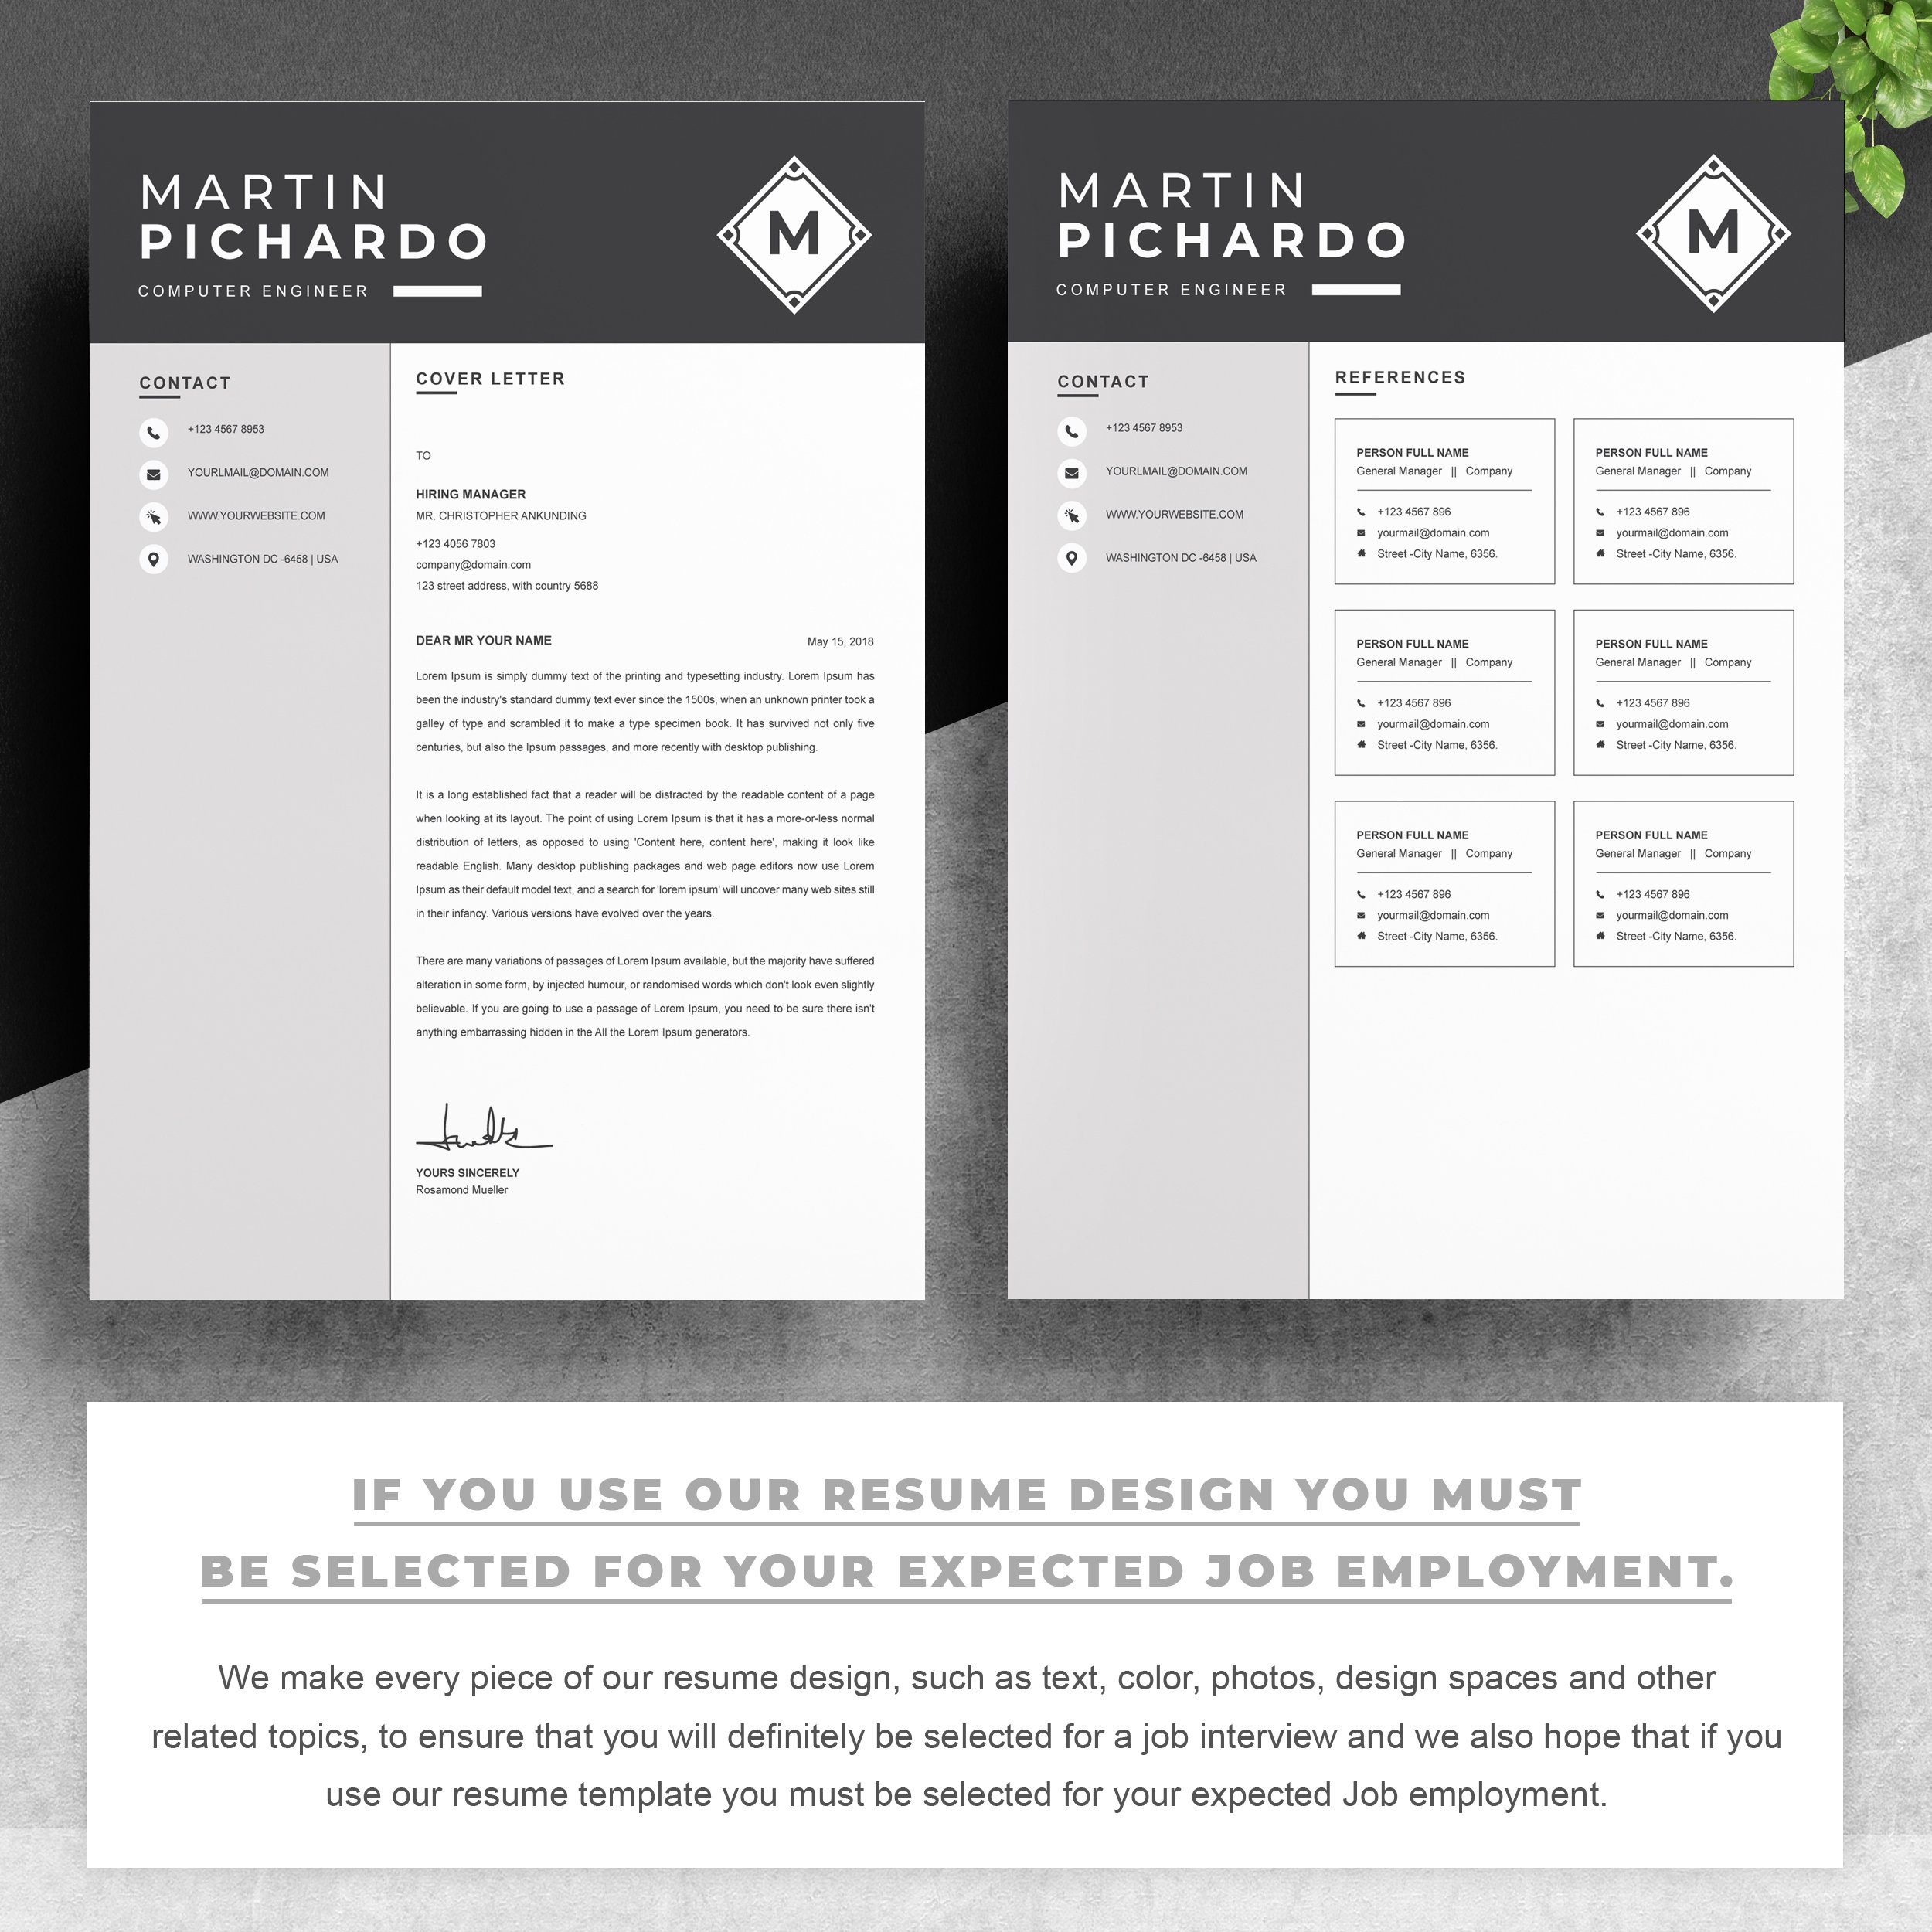 03 2 pages free resume design template copy 286